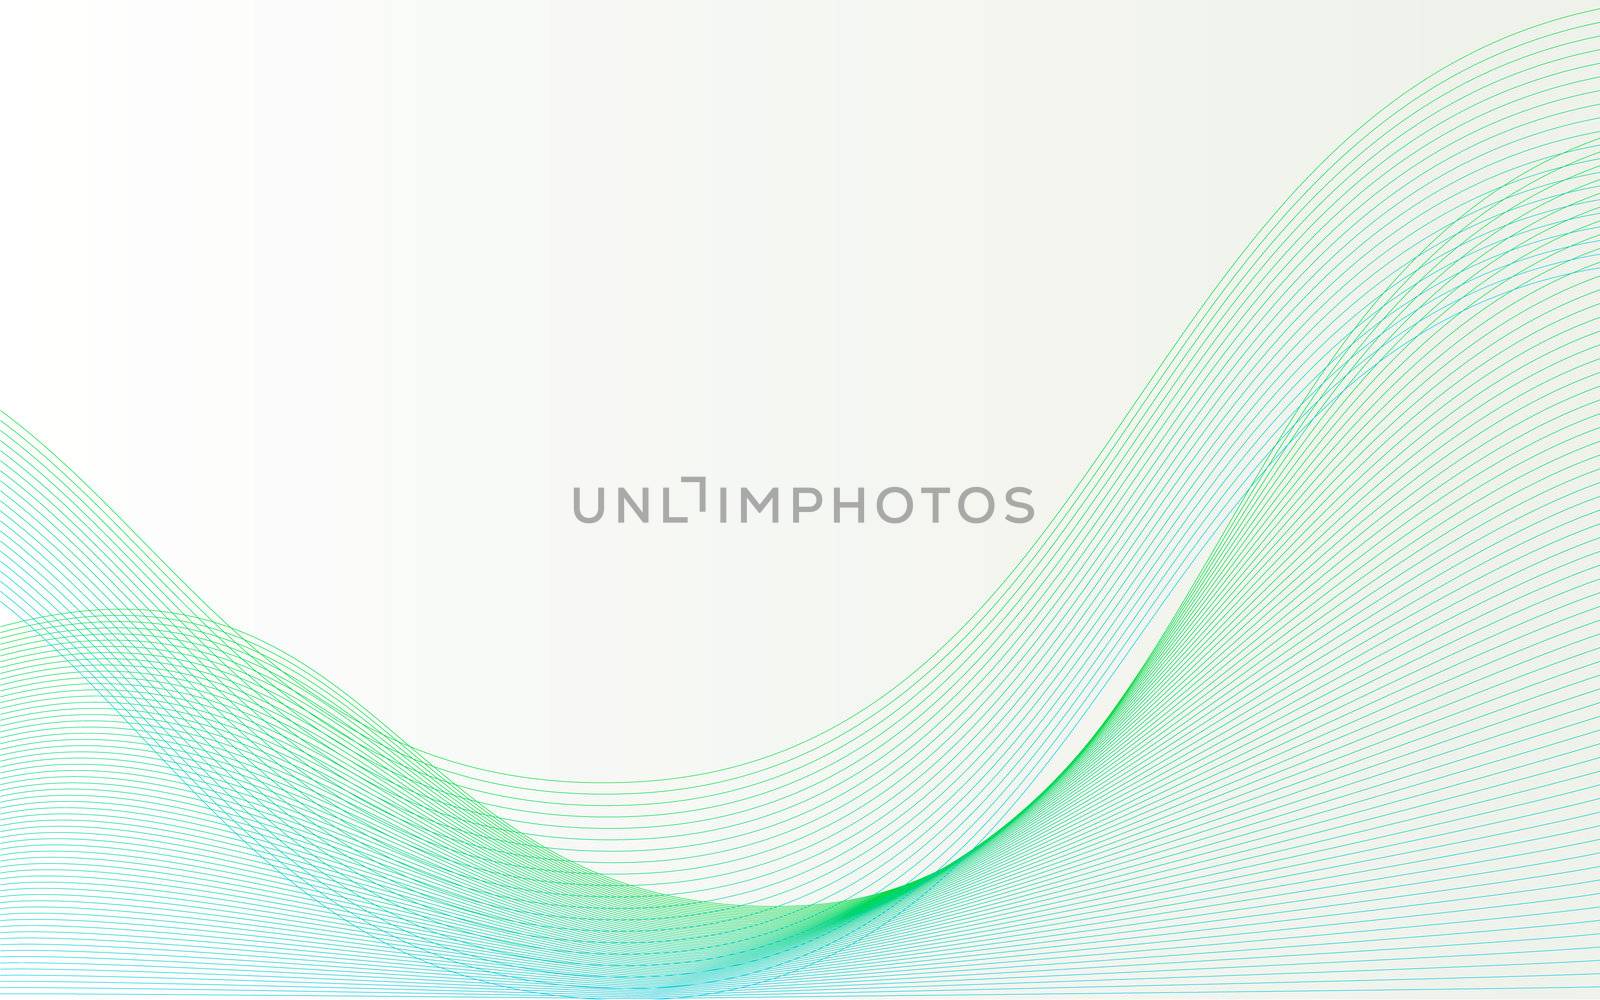 organic wallpaper with fine lines, also suitable as business card or header